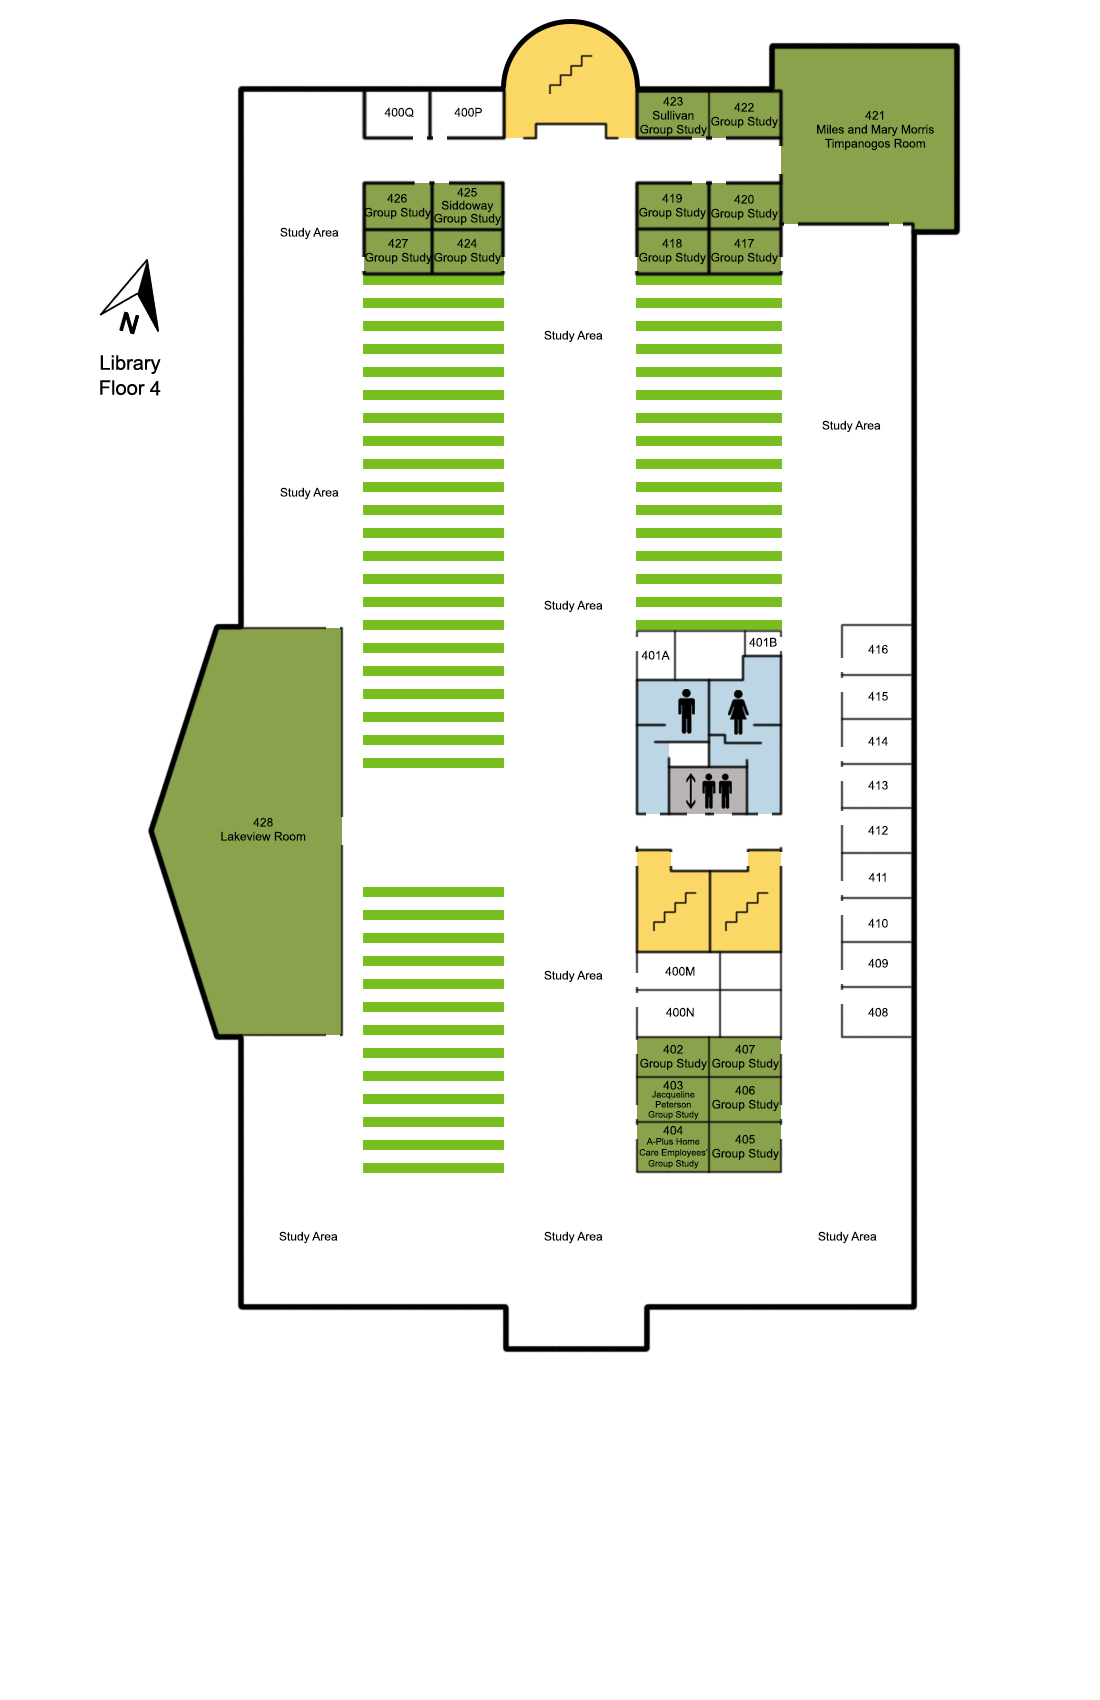 Fulton Library map of the first floor.